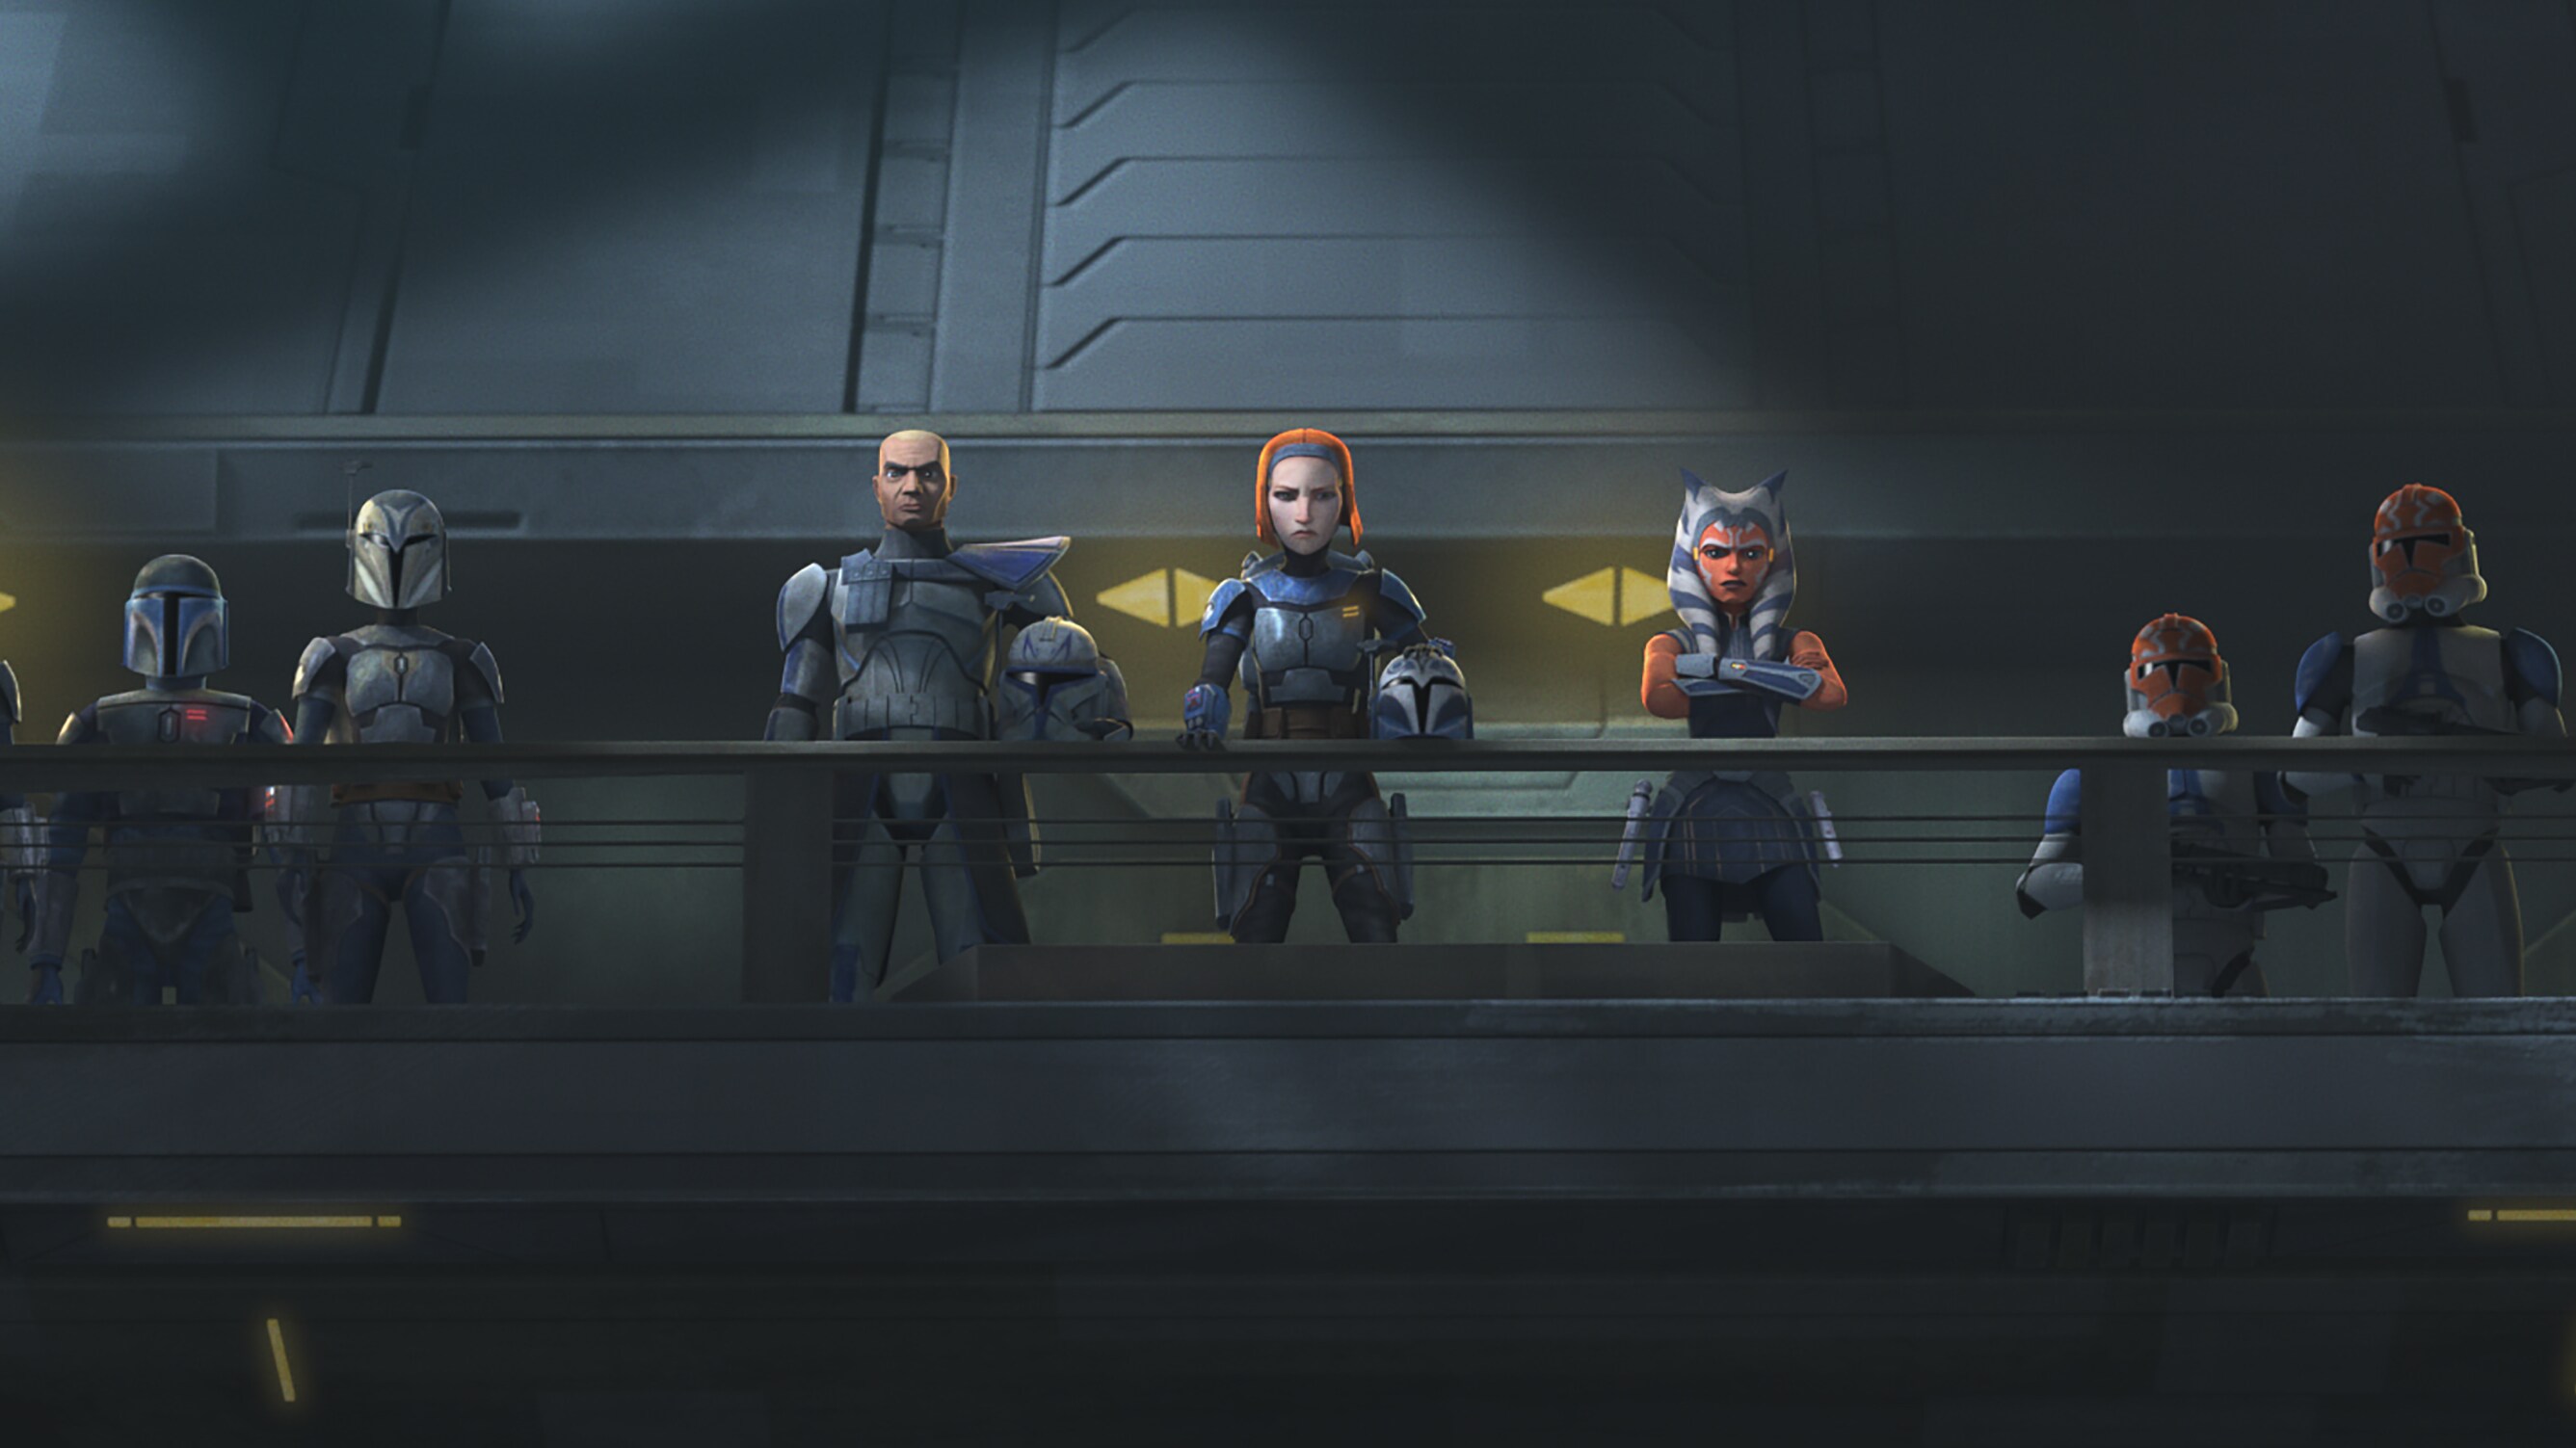 Rex, Bo-Katan, Ahsoka and their forces prepare to confront Maul in STAR WARS: THE CLONE WARS, exclusively on Disney+.